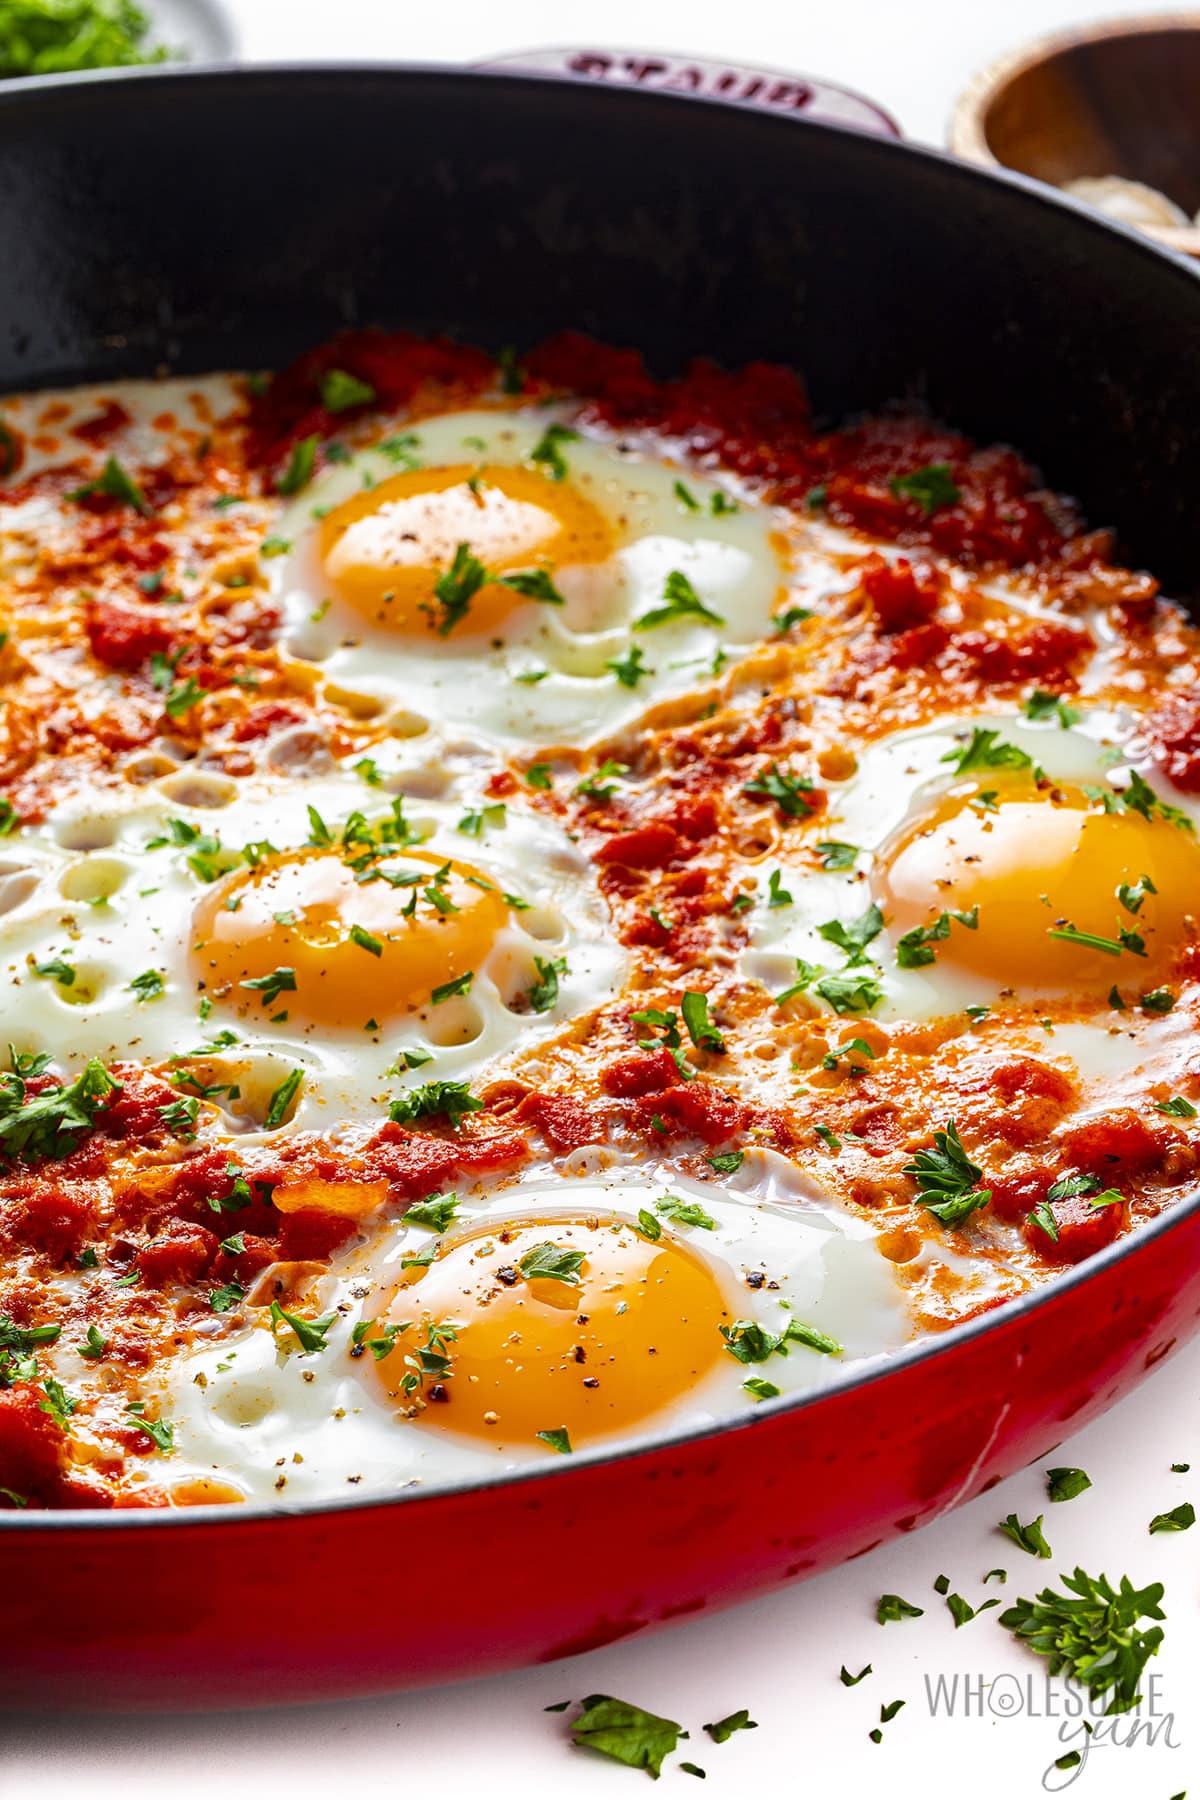 Spiced egg dish in a skillet.